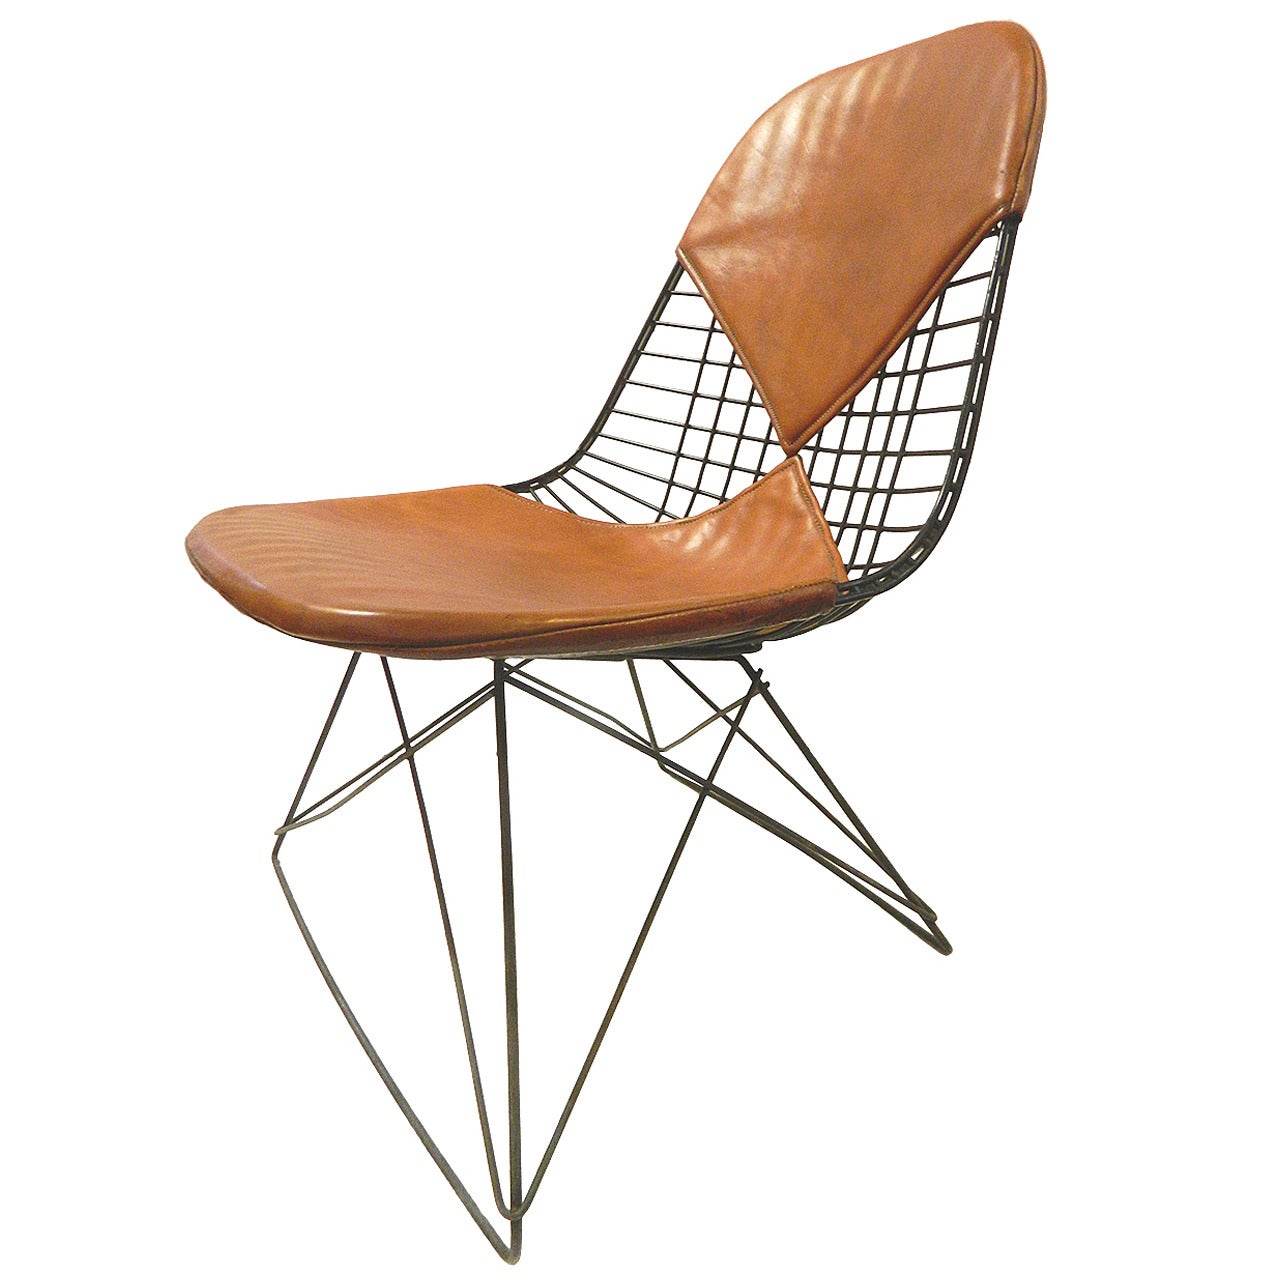 Eames LKR Lounge Chair For Sale